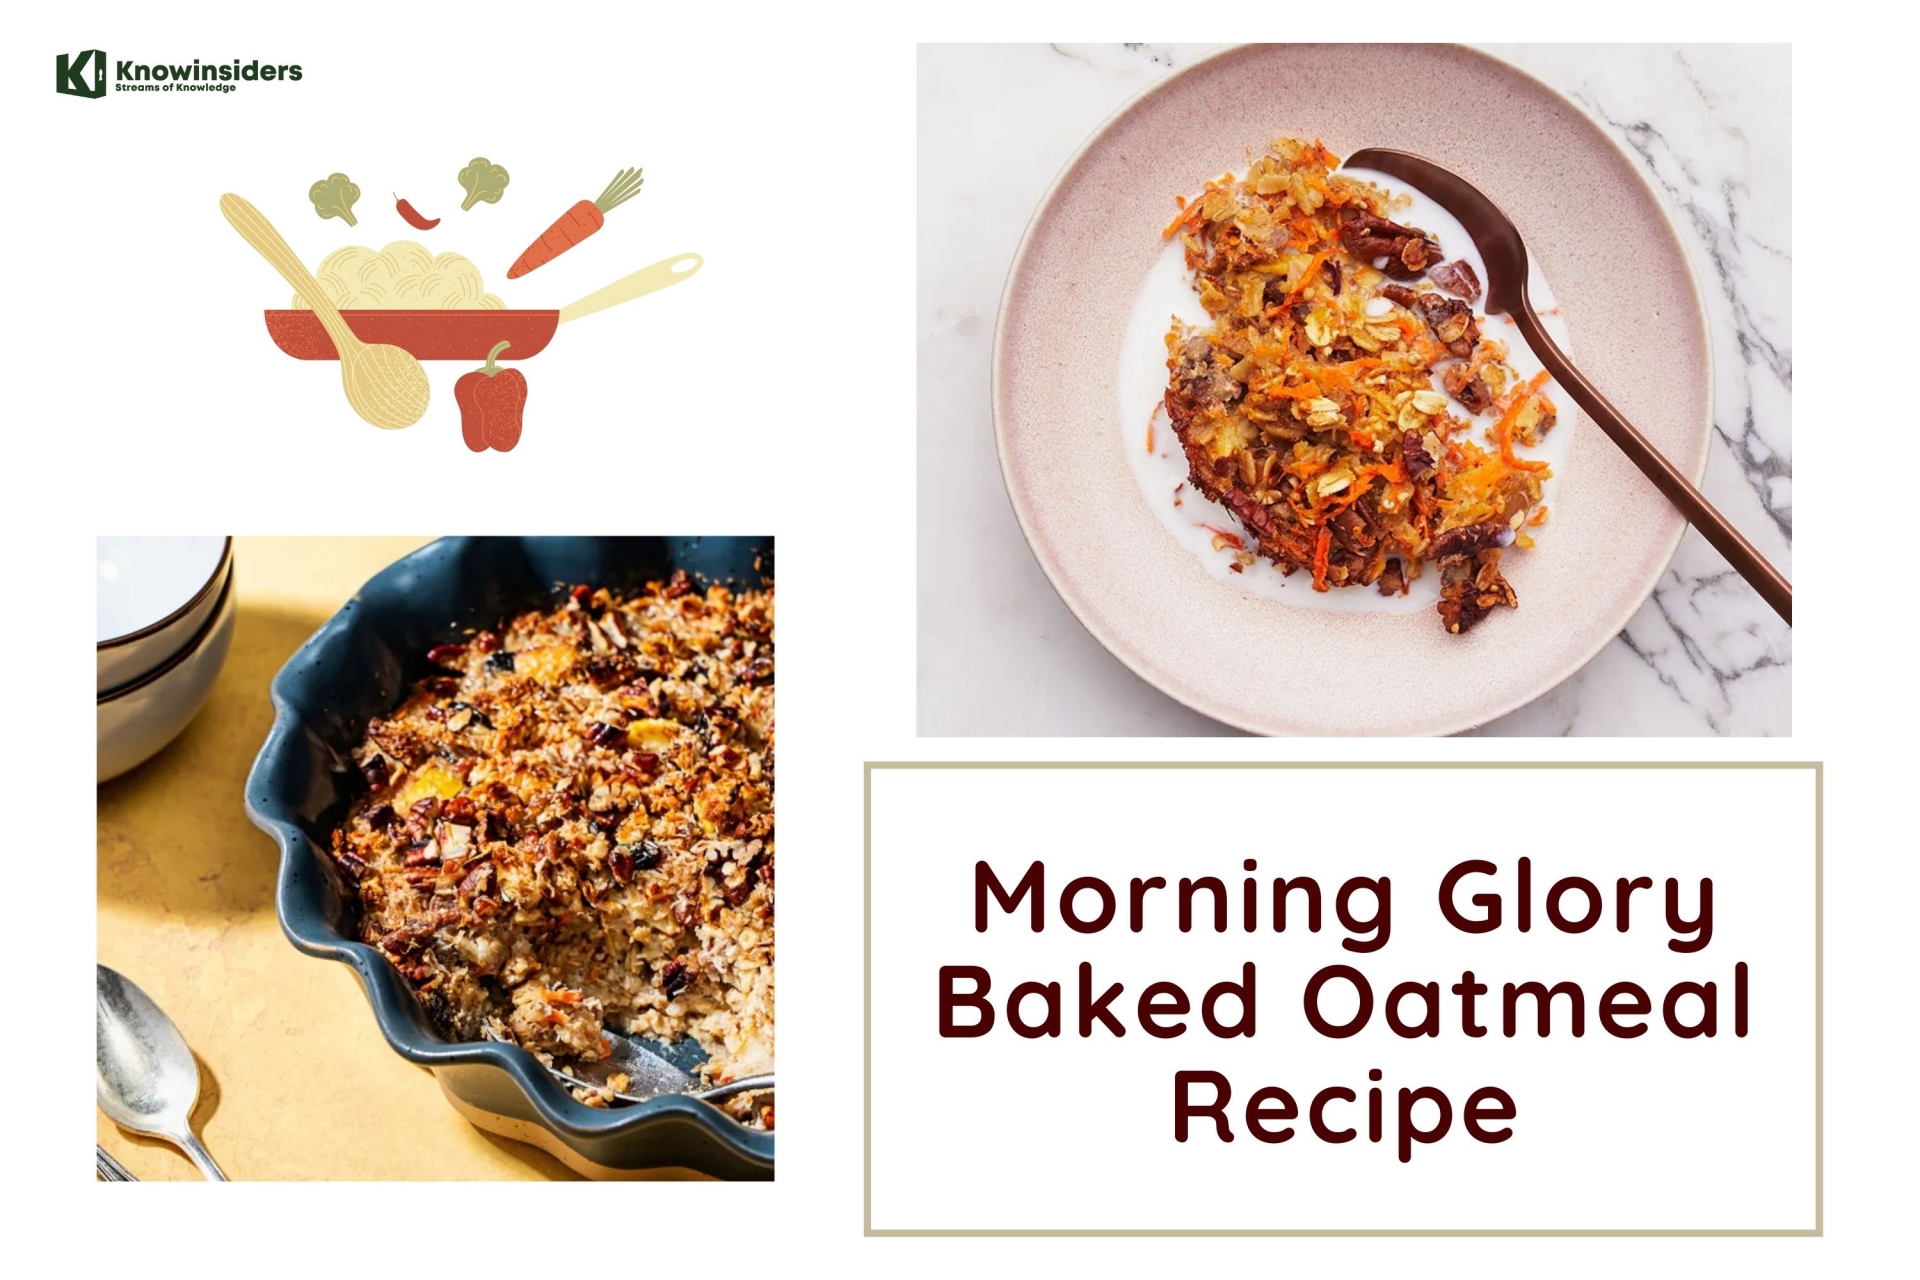 How to Make Morning Glory Baked Oatmeal with Easy Steps